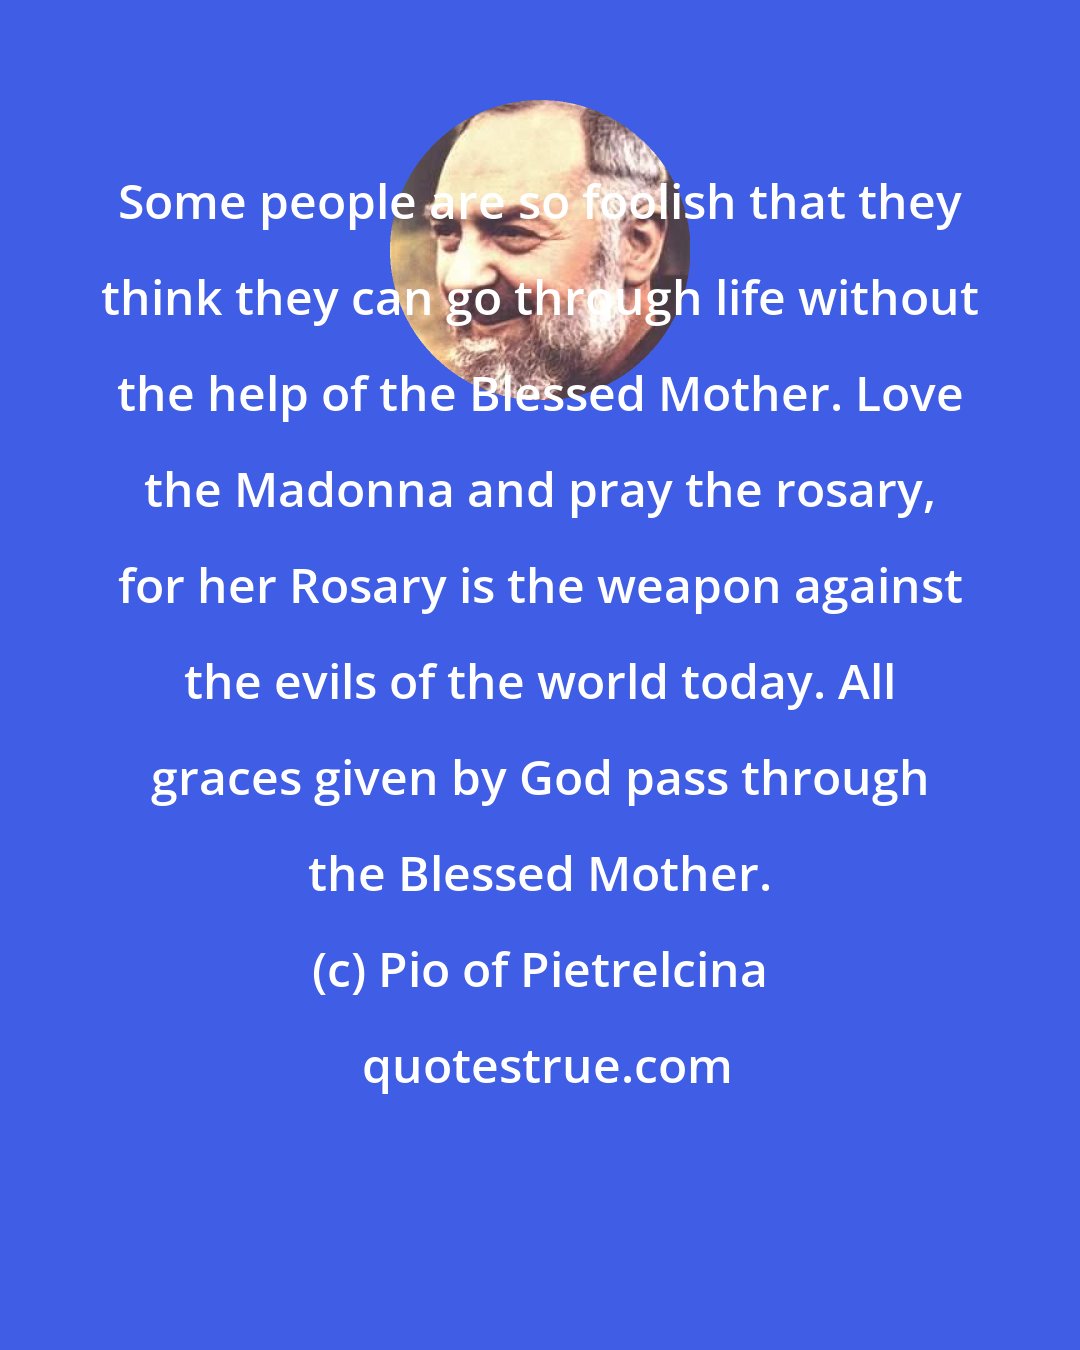 Pio of Pietrelcina: Some people are so foolish that they think they can go through life without the help of the Blessed Mother. Love the Madonna and pray the rosary, for her Rosary is the weapon against the evils of the world today. All graces given by God pass through the Blessed Mother.